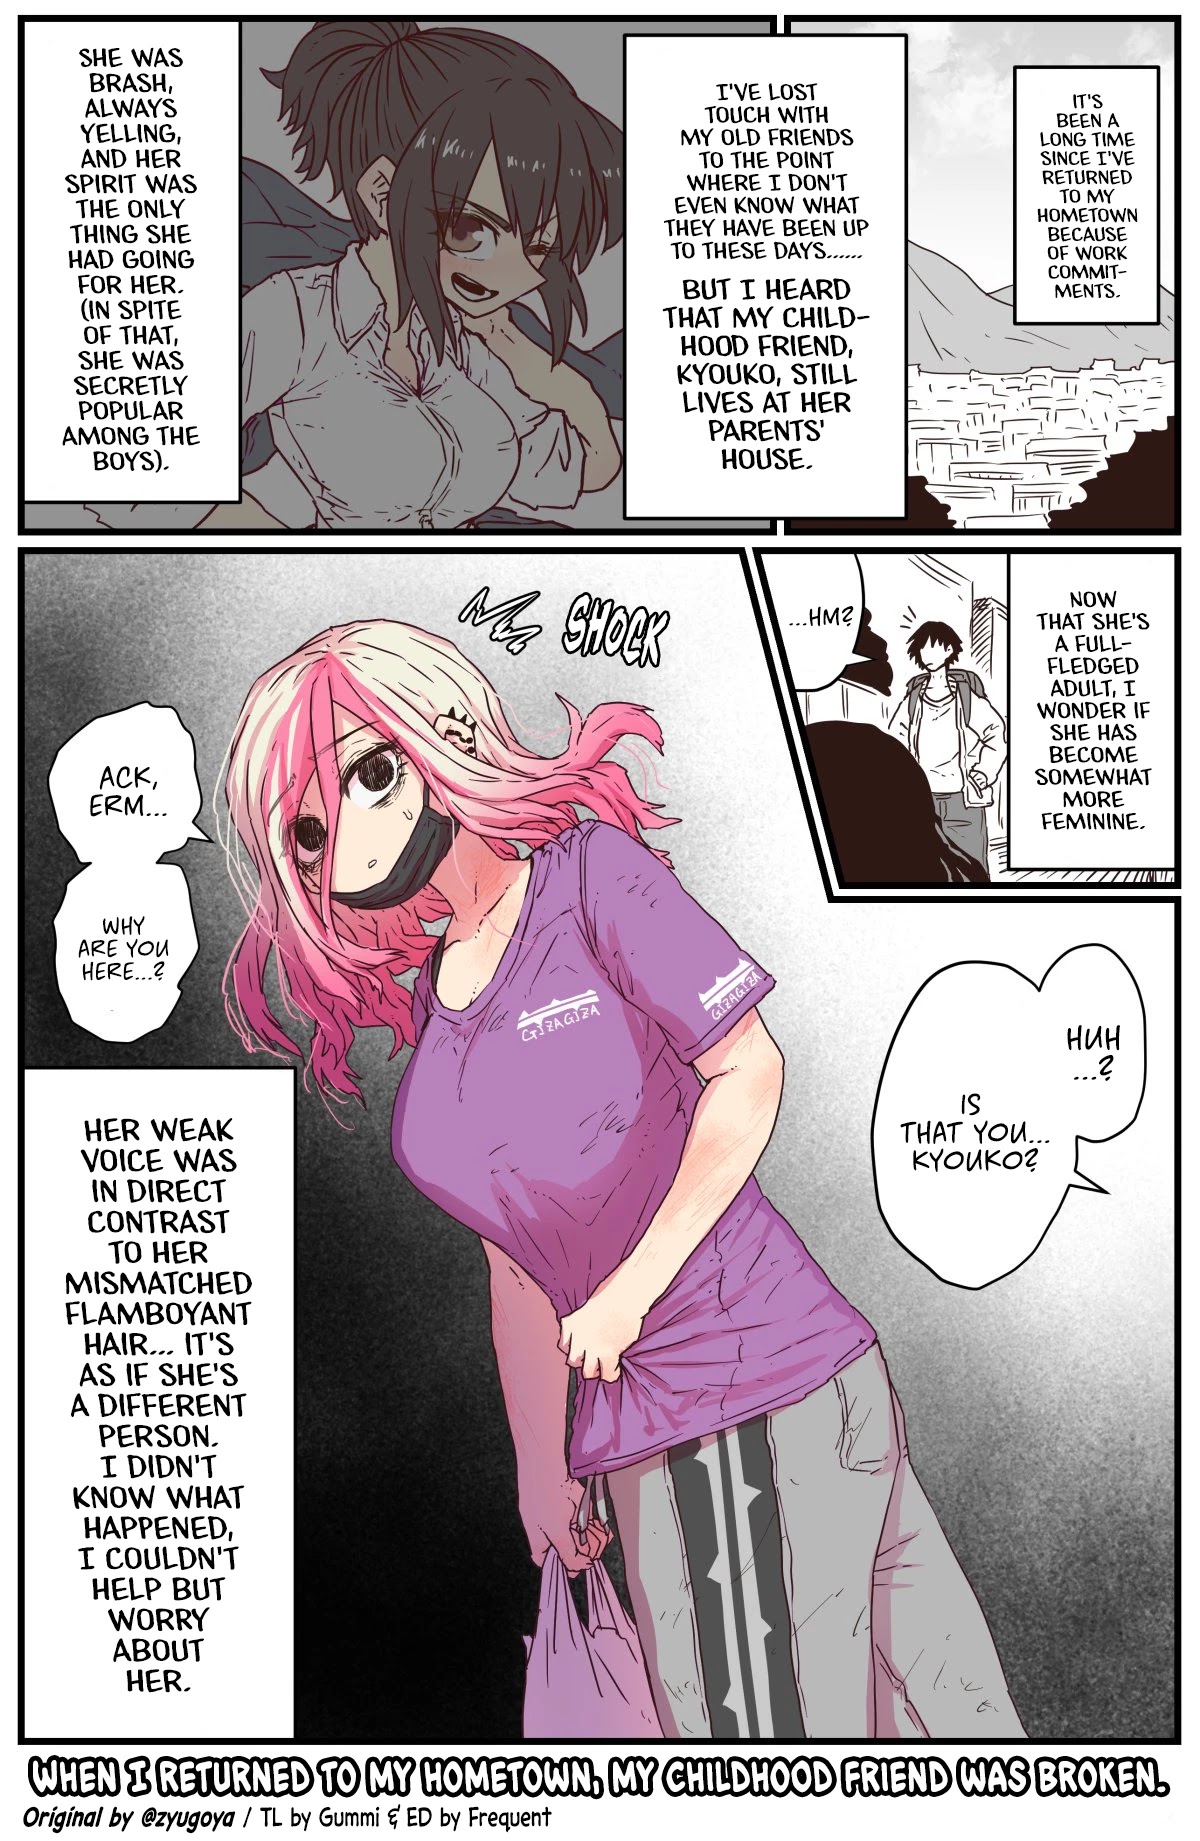 When I Returned To My Hometown, My Childhood Friend Was Broken - Page 1